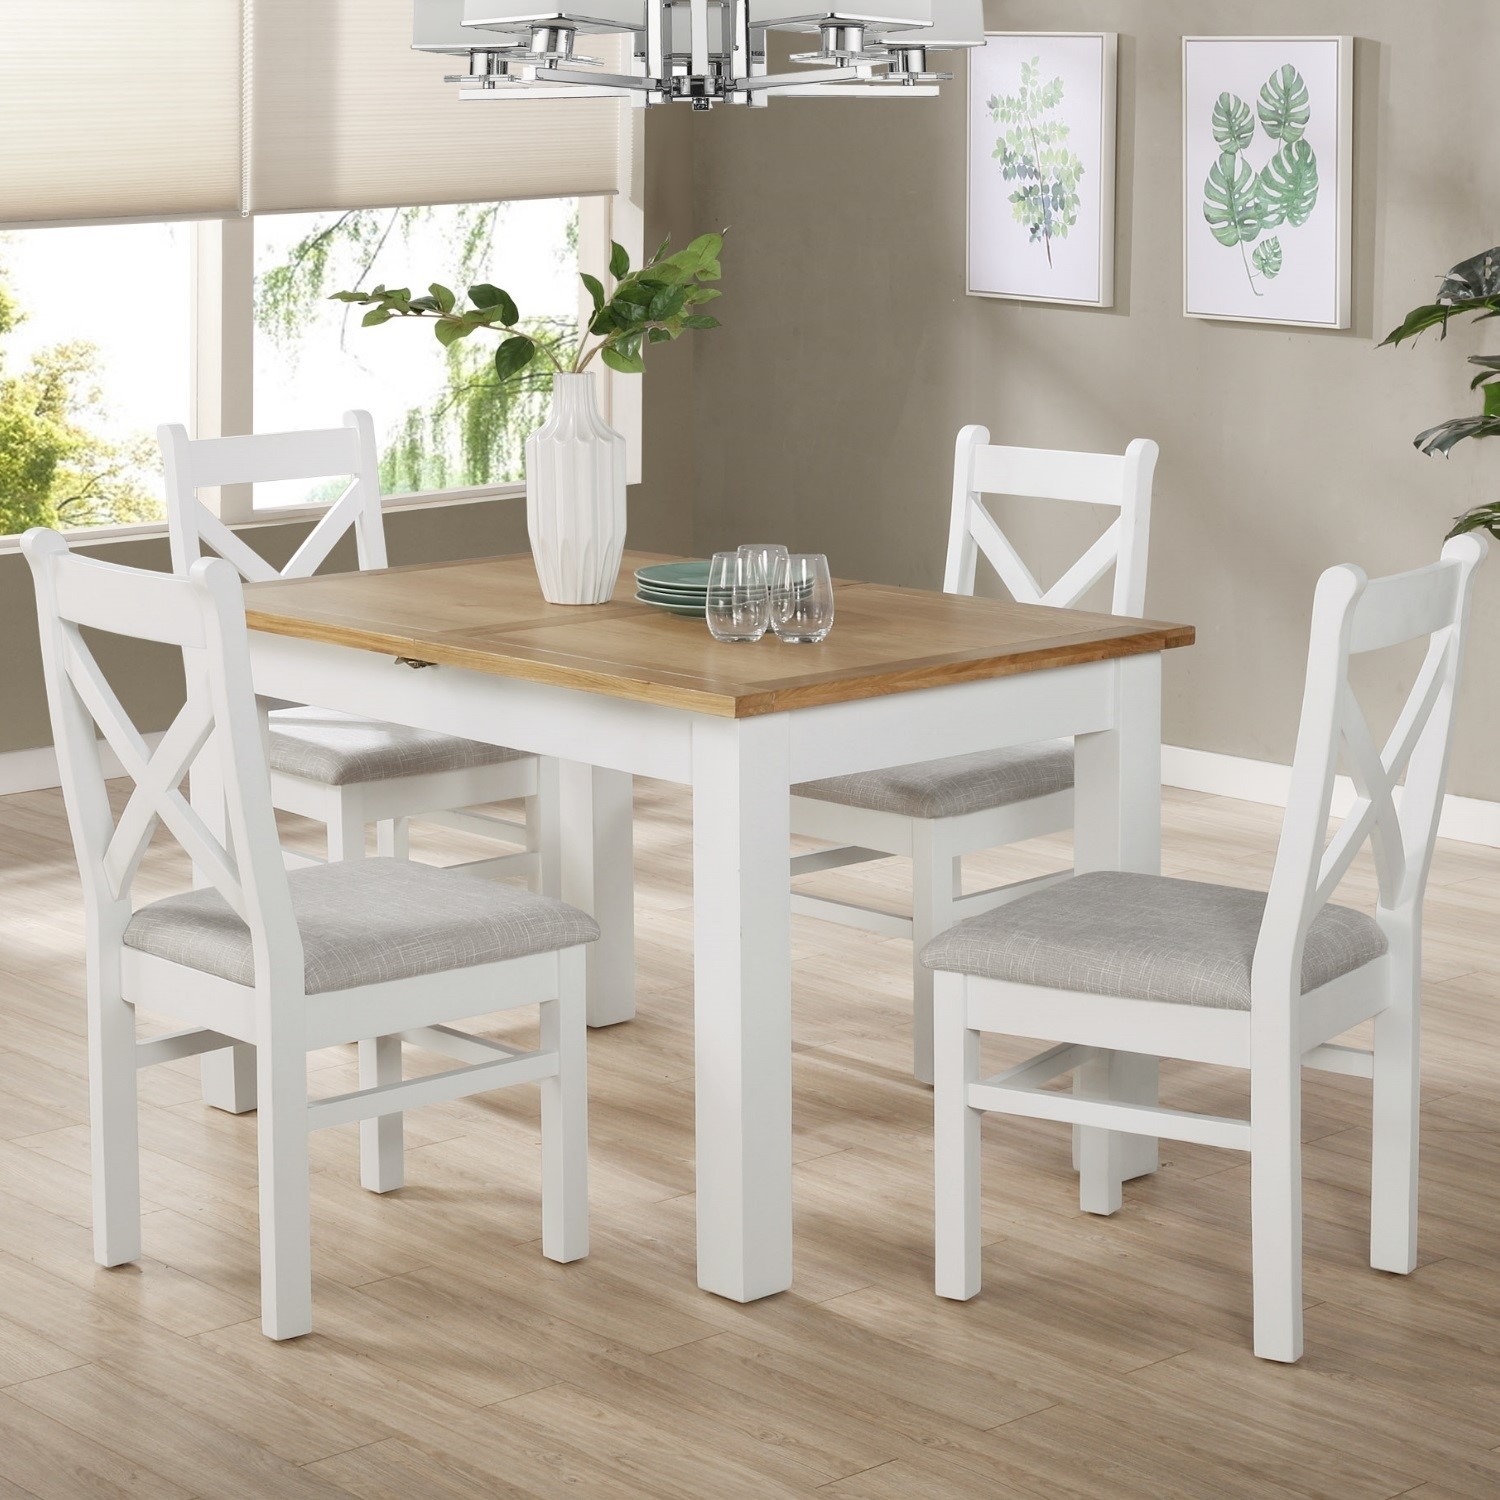 White Extendable Dining Table In Solid Wood With An Oak Top Aylesbury Furniture123